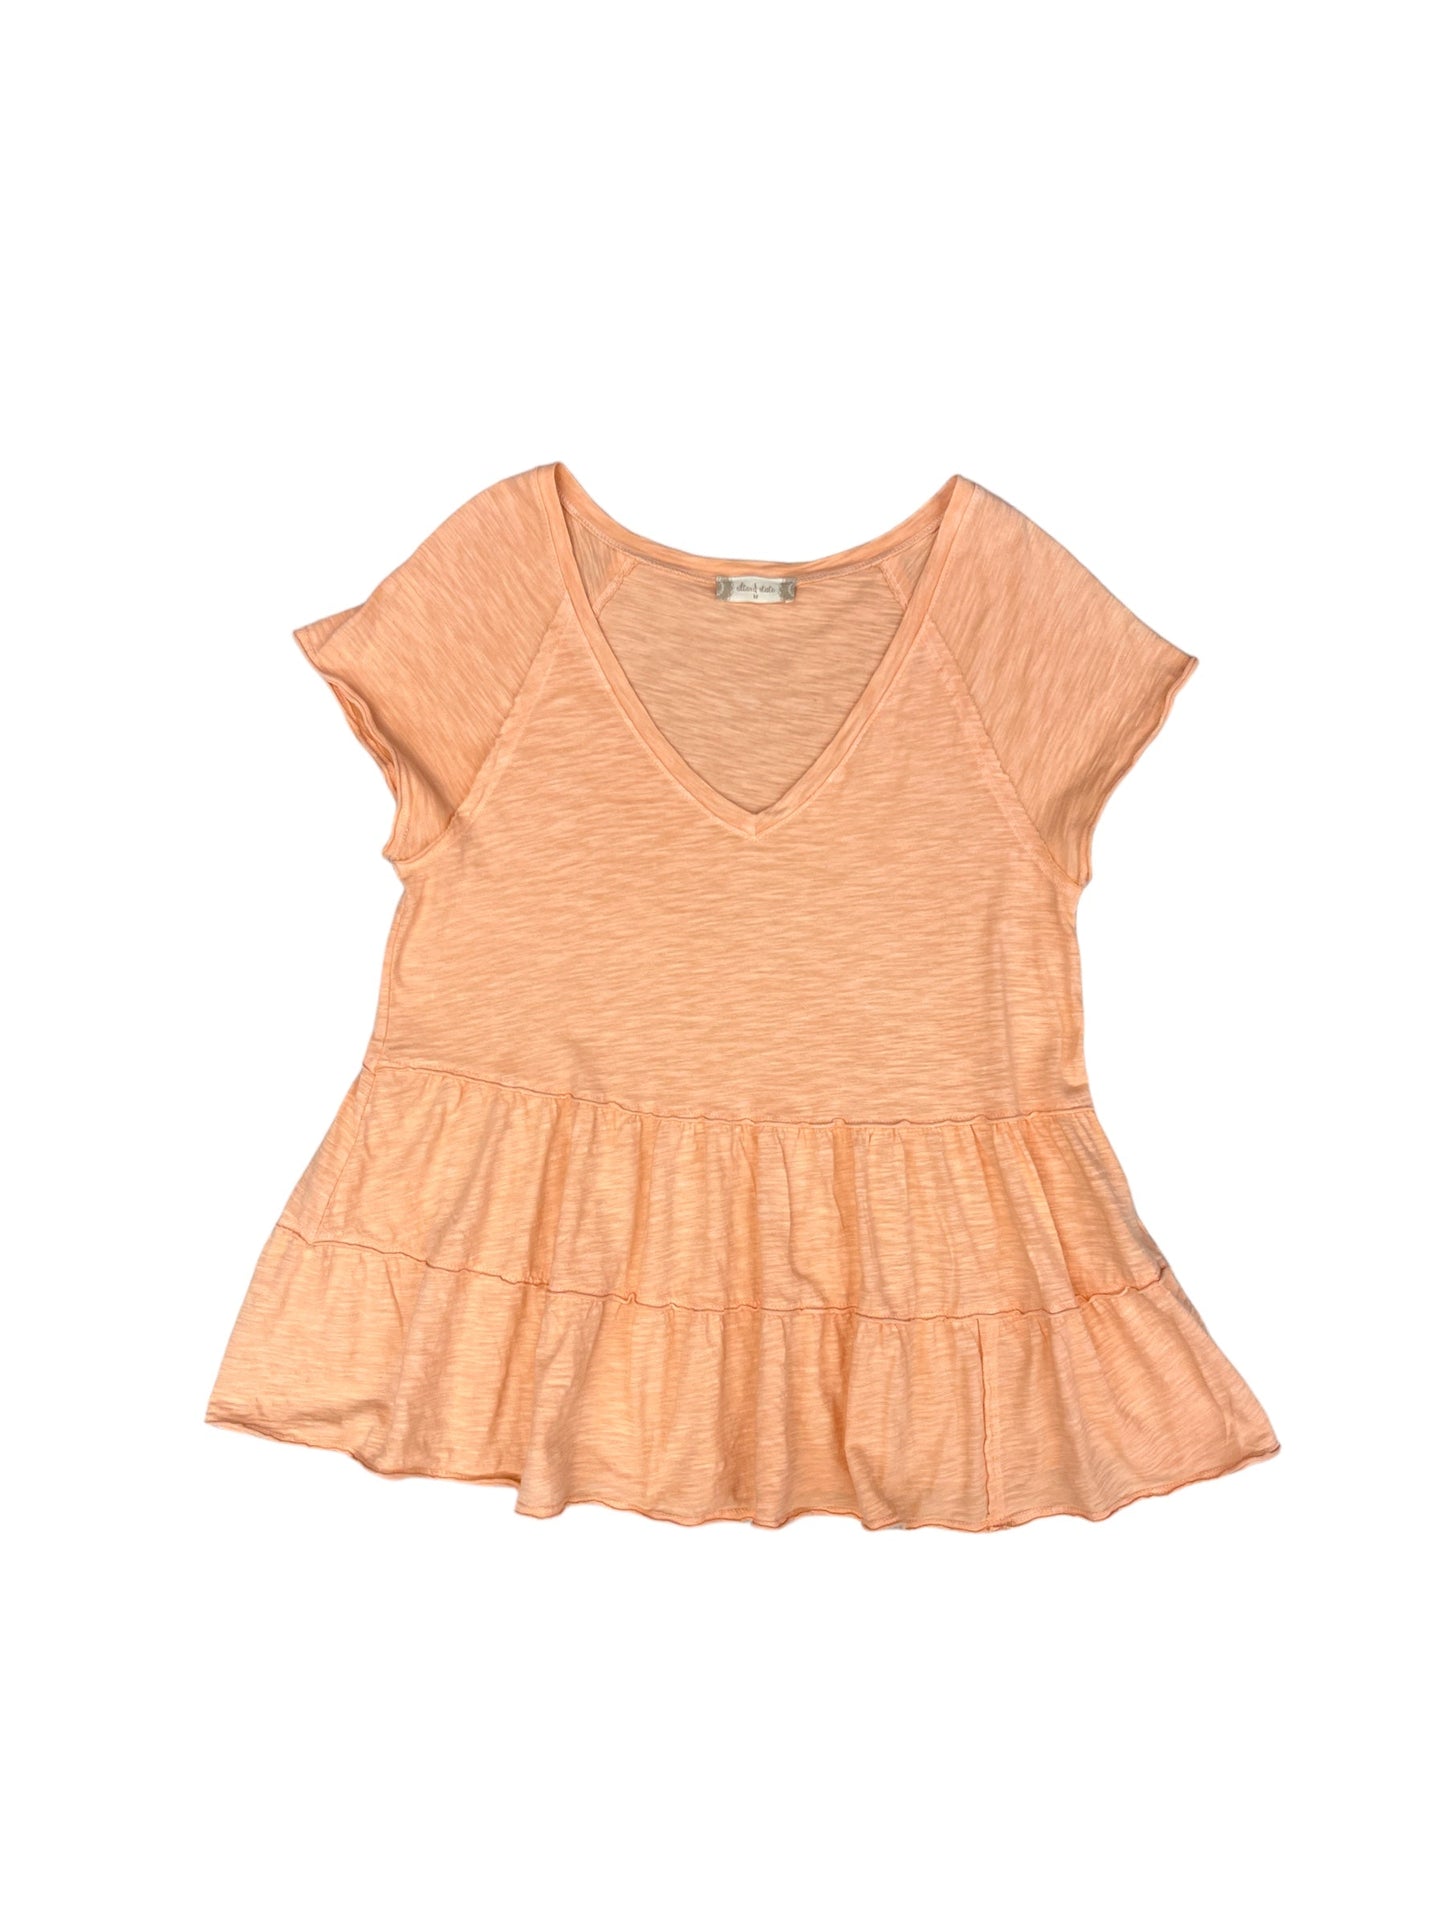 Peach Top Short Sleeve Altard State, Size M